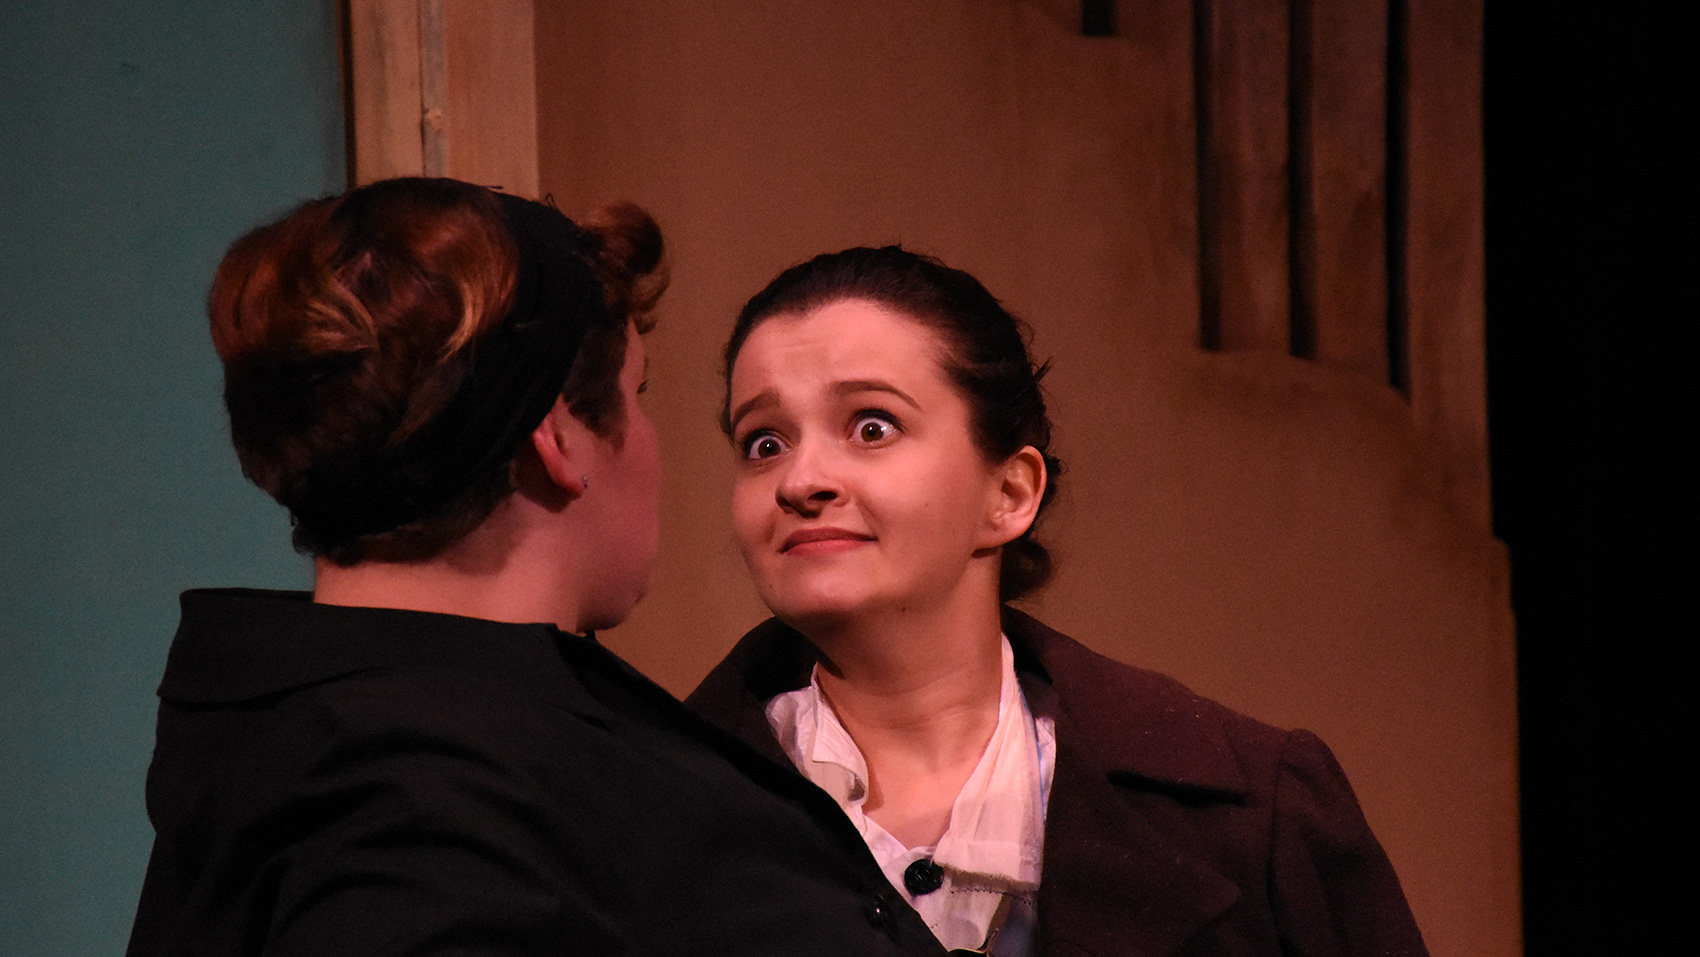 Two women face each other, one leaning forward into the other's face, her eyebrows raised with a questioning, almost intimidating look on her face.